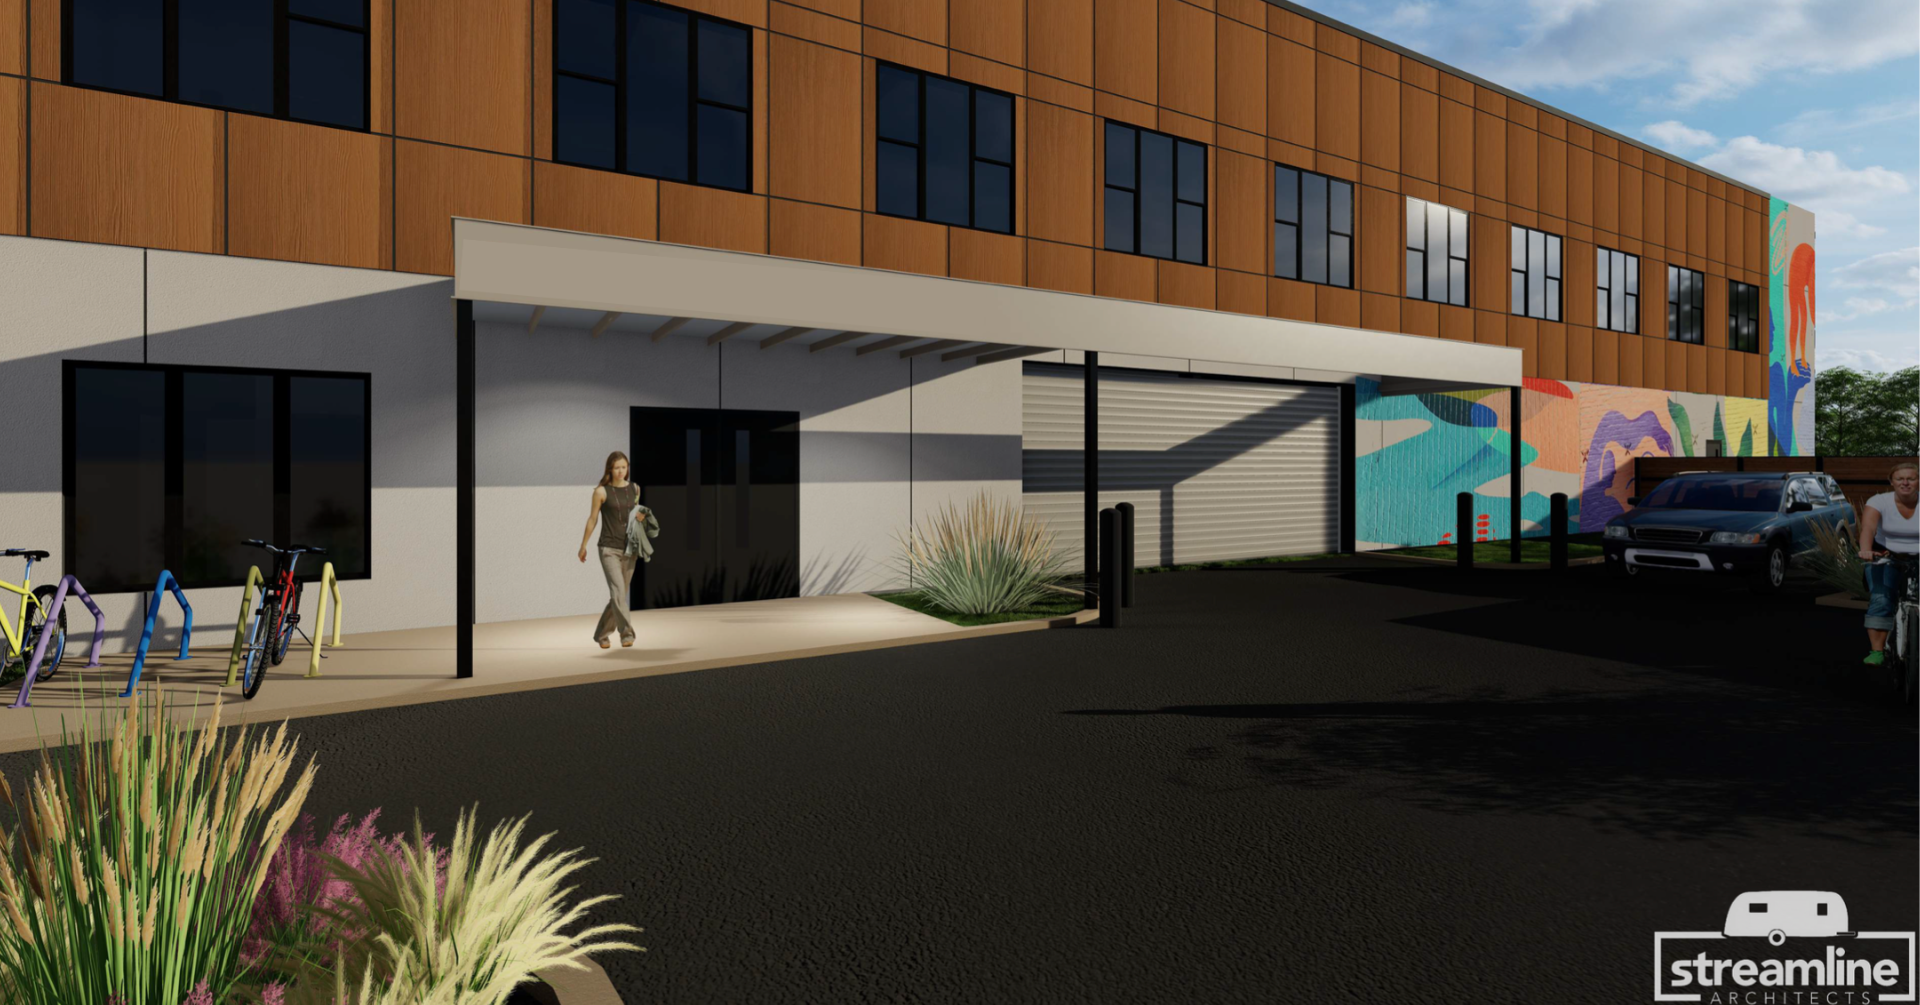 A rendering of the Domestic Violence Intervention Program's (DVIP) new emergency shelter. CREDIT STREAMLINE ARCHITECTS